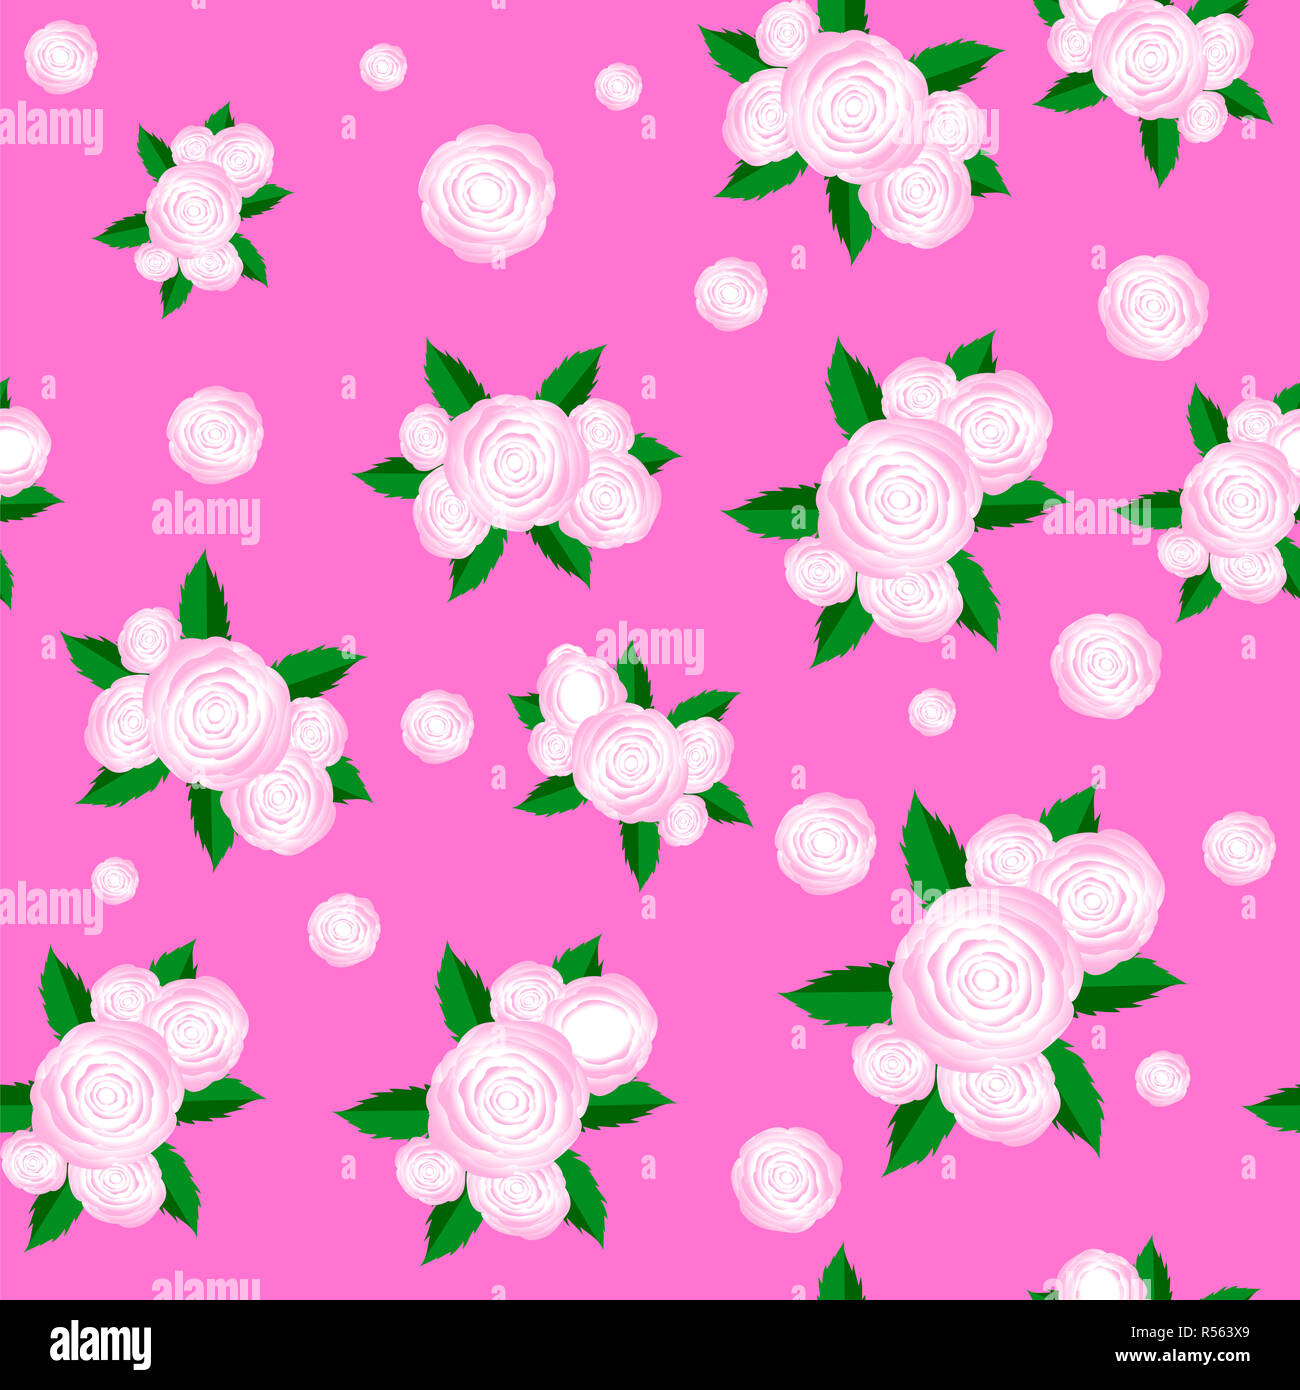 Bouquet of Roses Randon Seamless Pattern Stock Photo